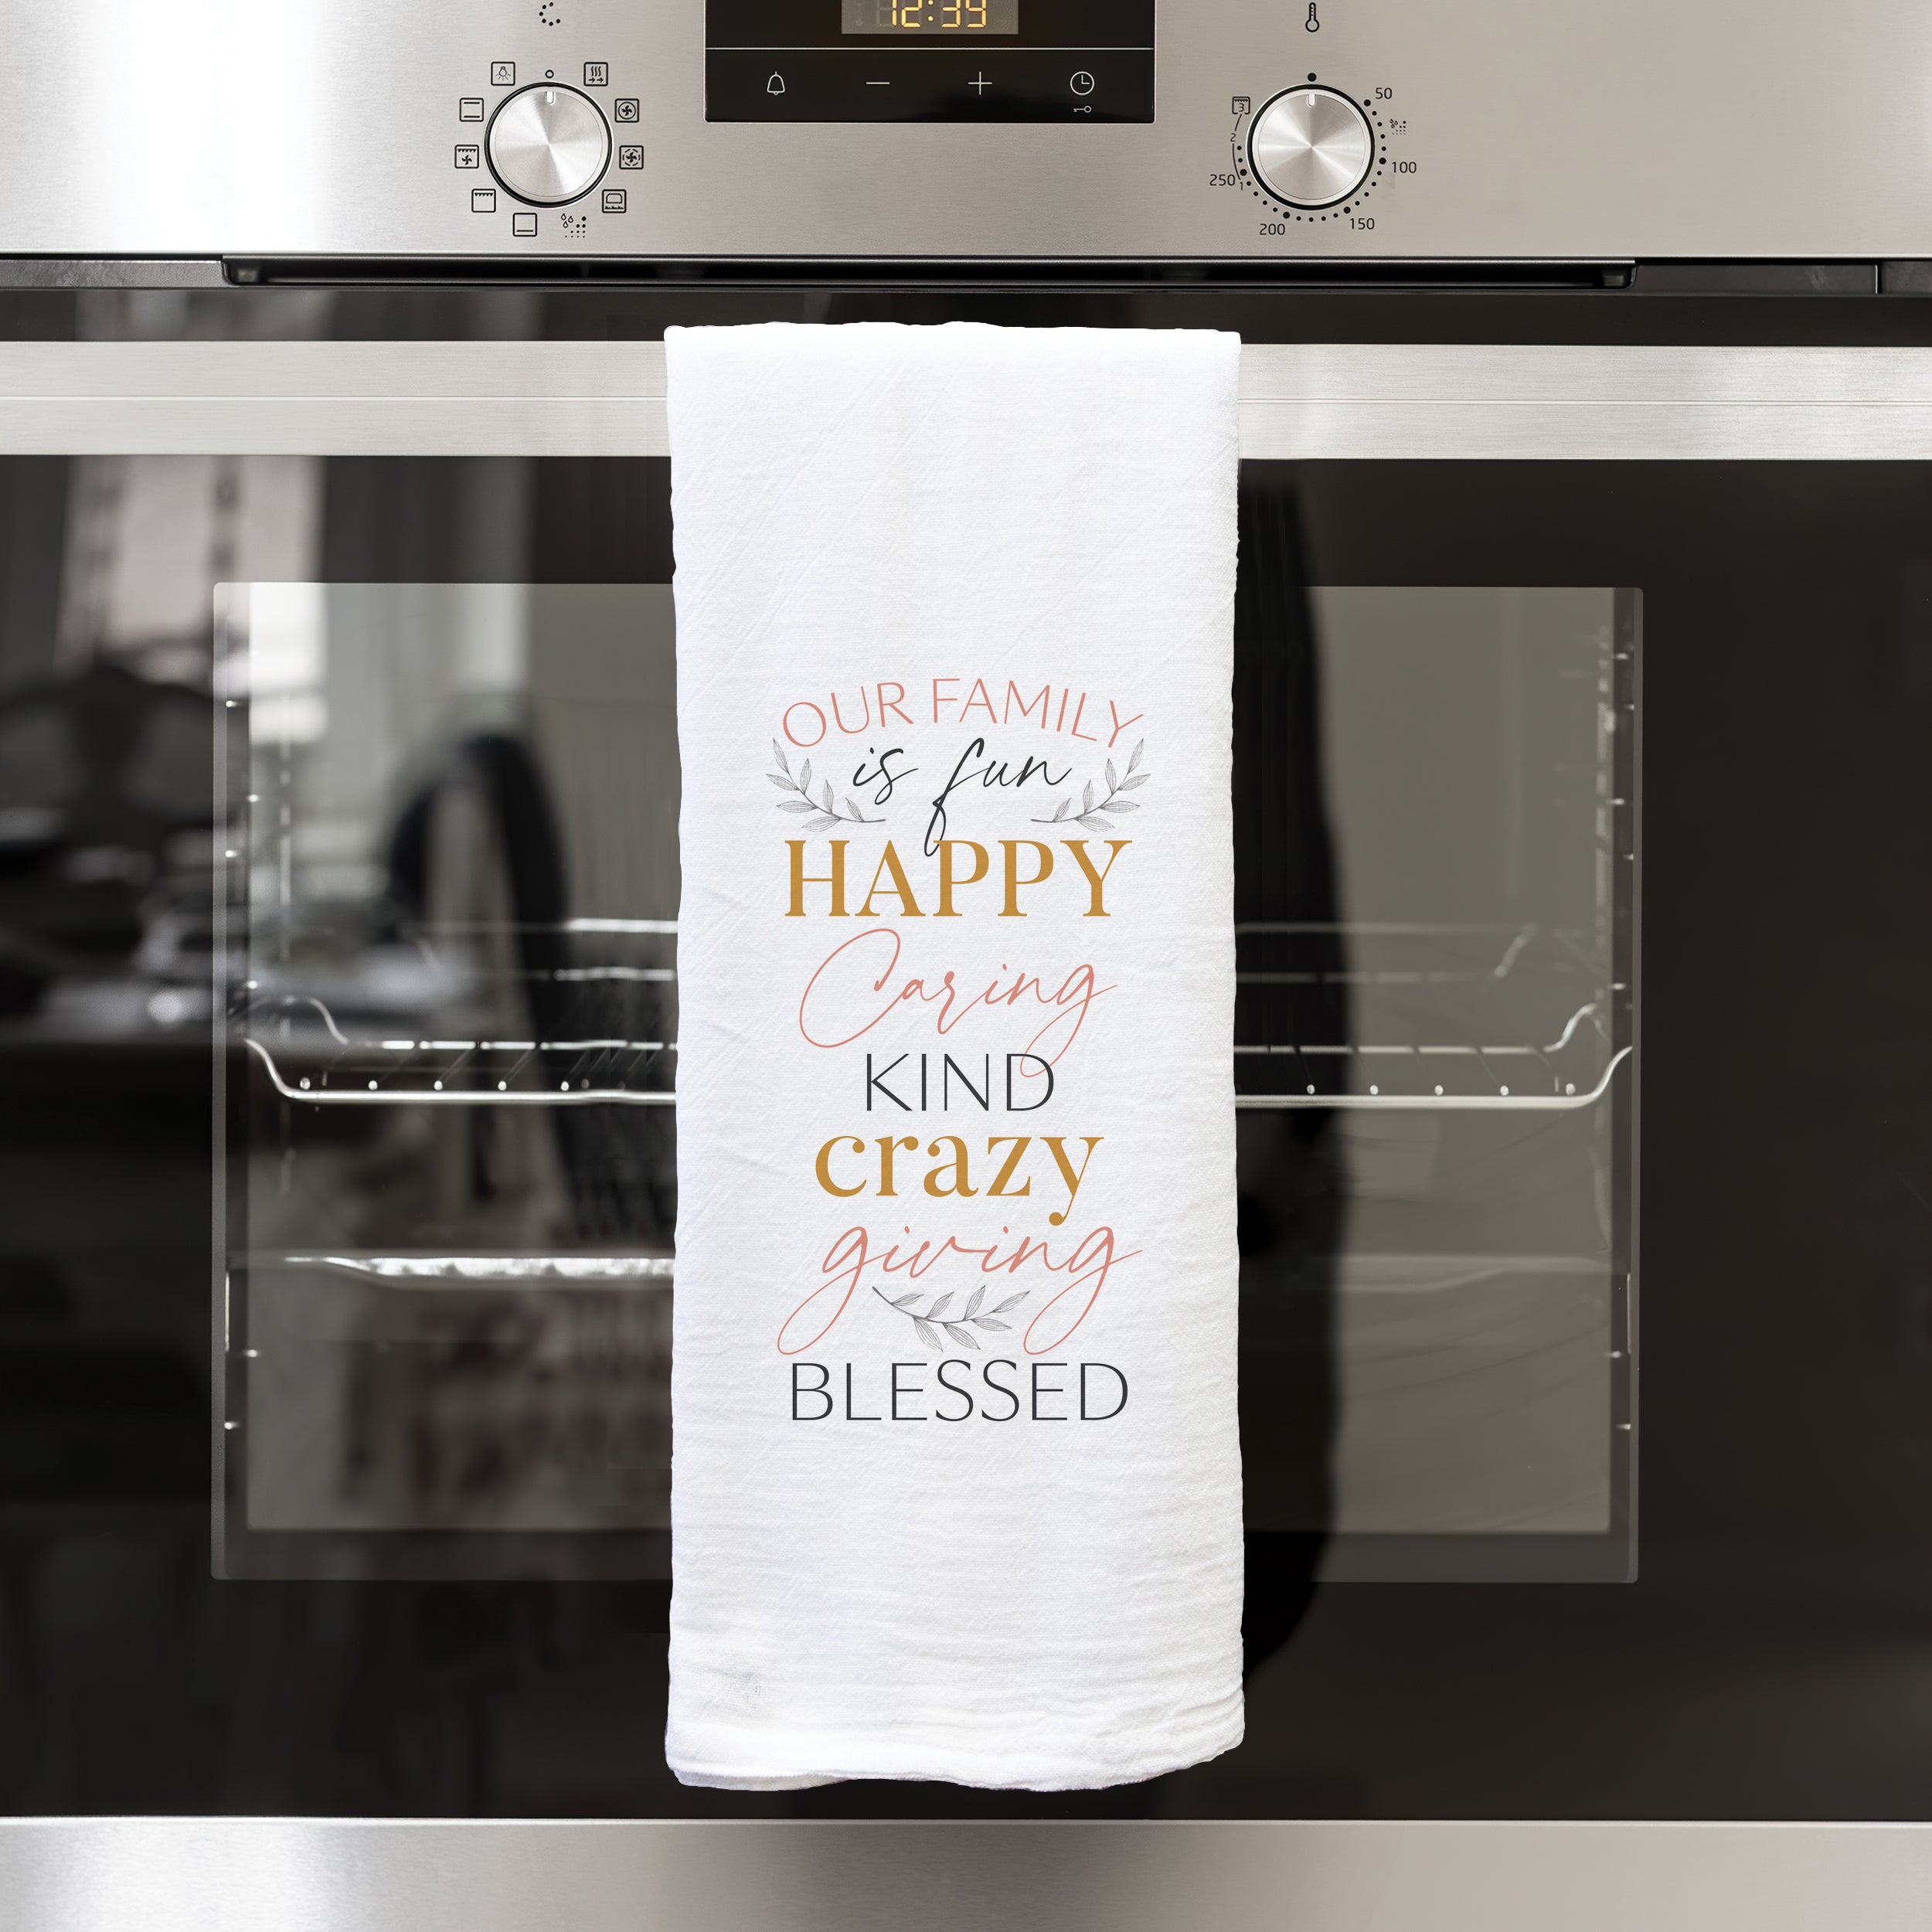 *Our Family Is Fun Happy Caring Kind Crazy Giving Blessed Tea Towel